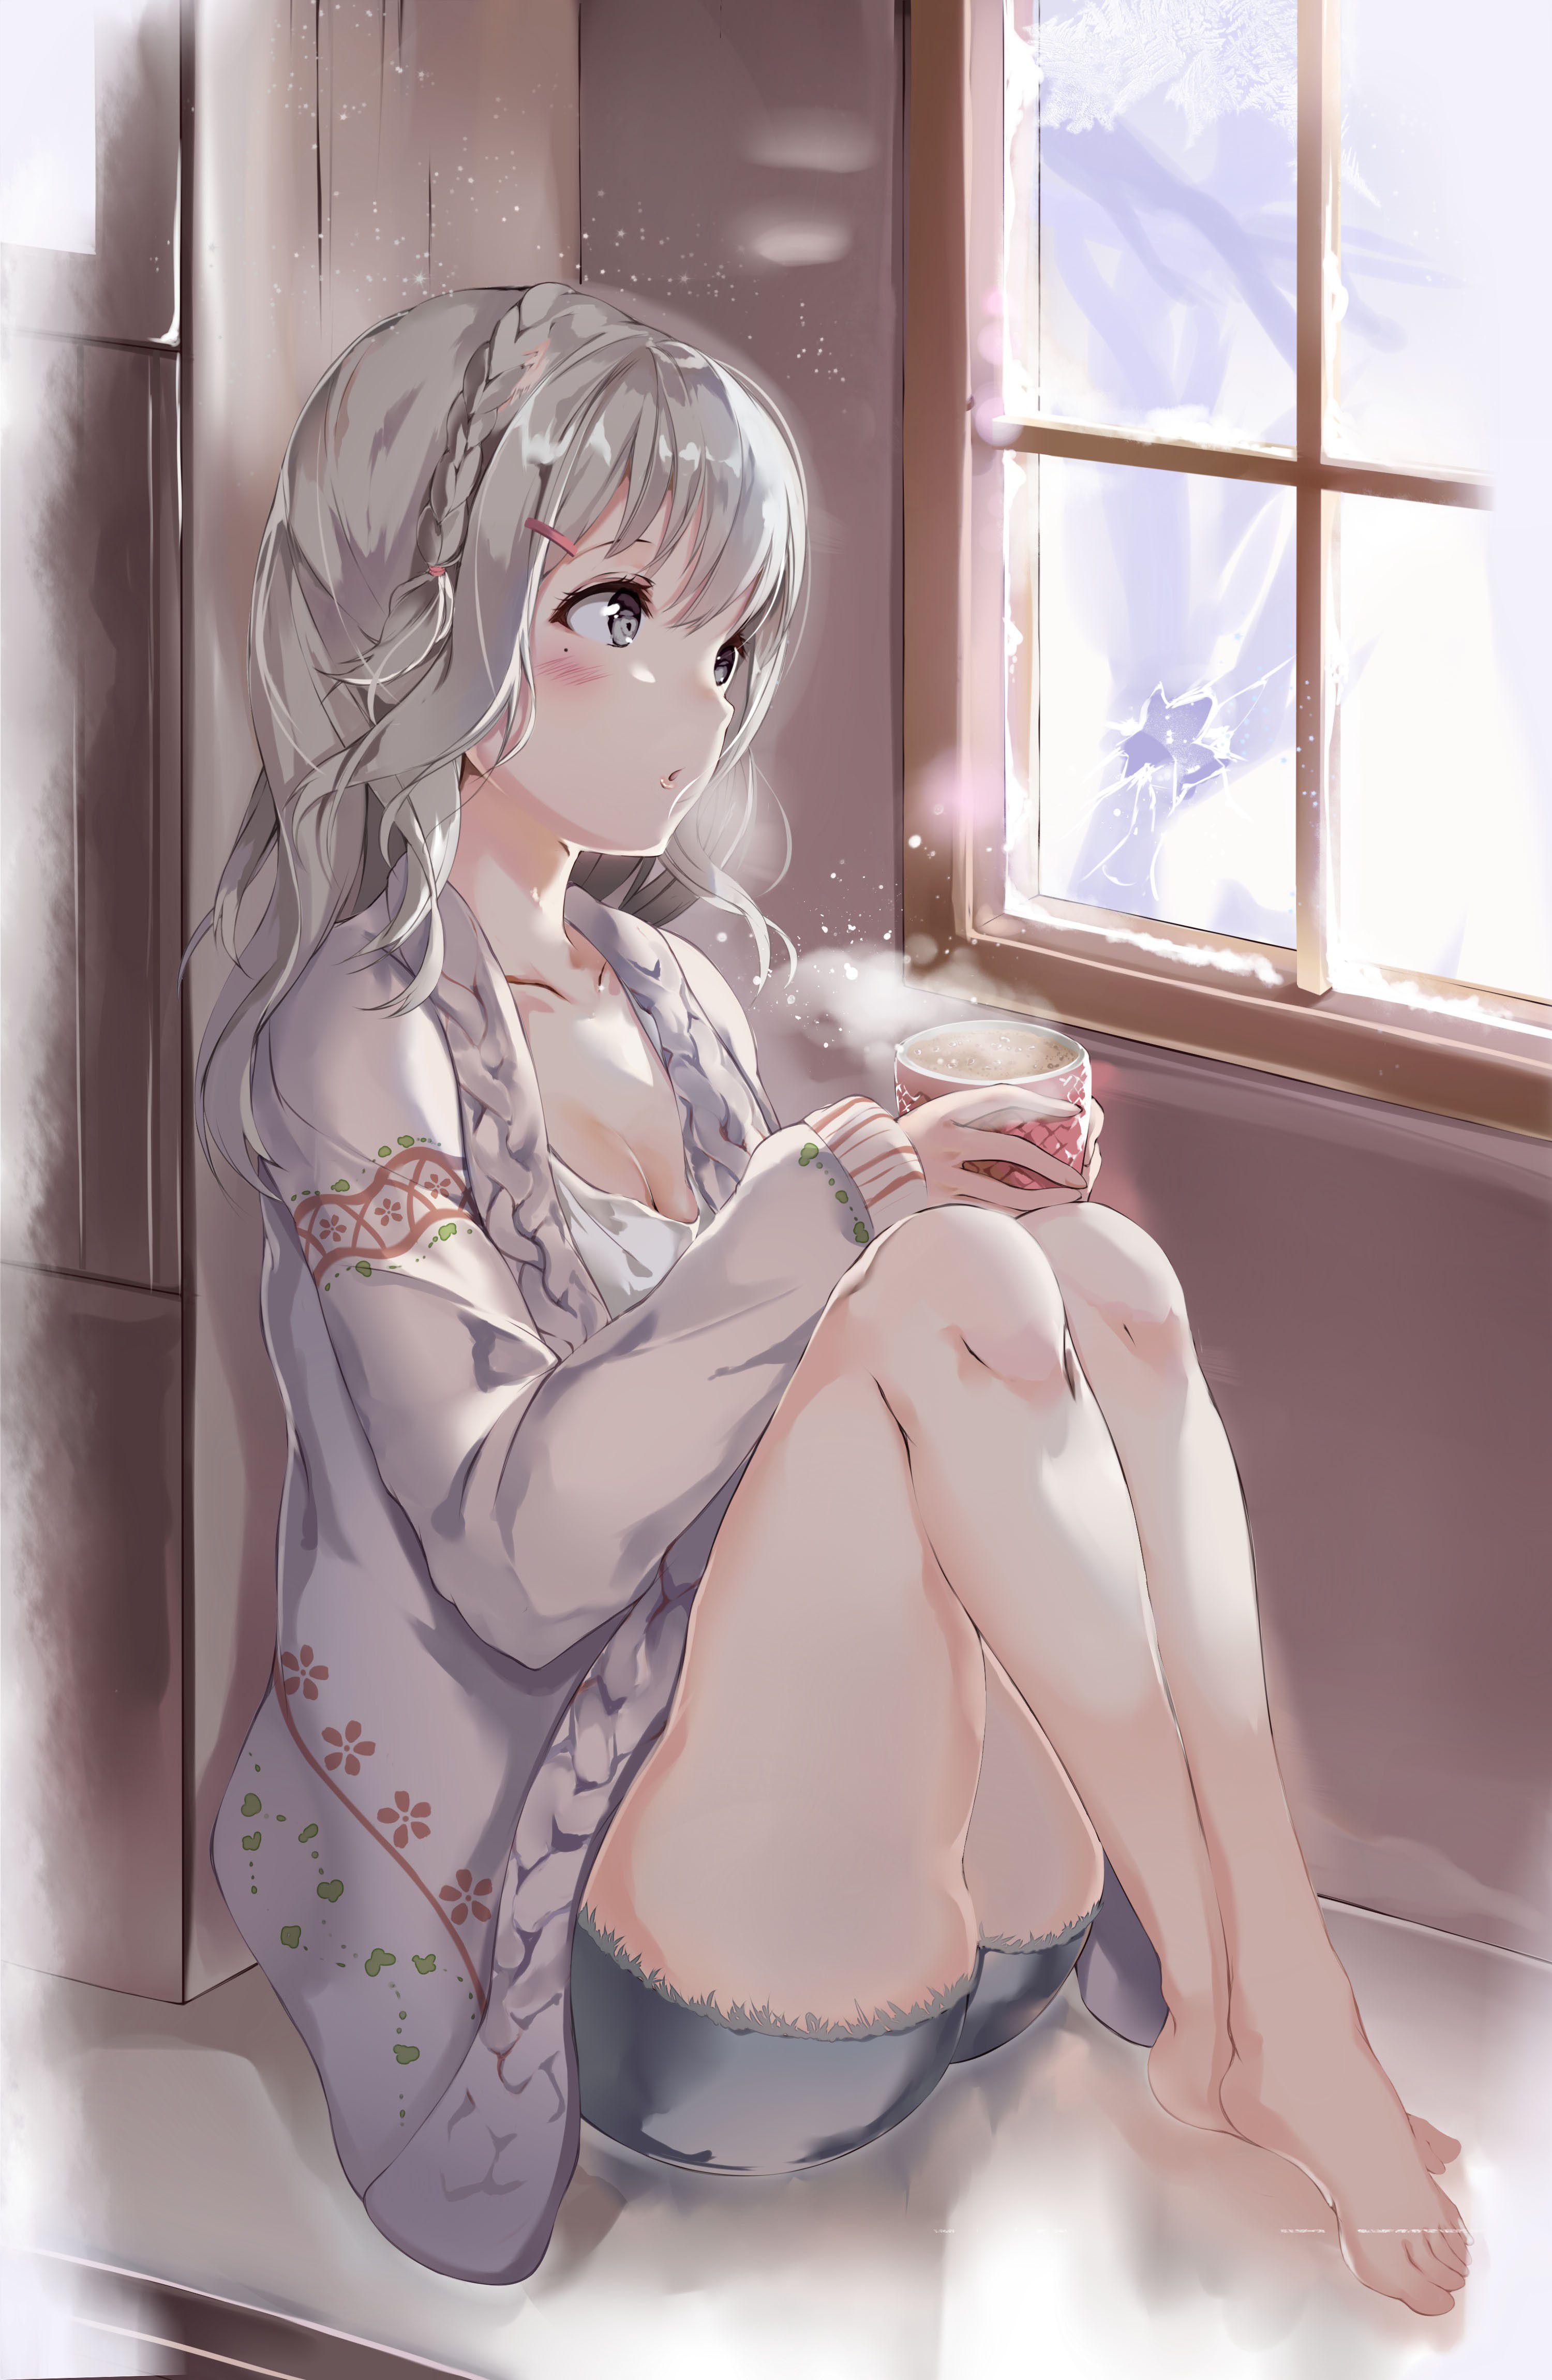 Secondary image of a cute girl who is drinking a drink [non-erotic] 21